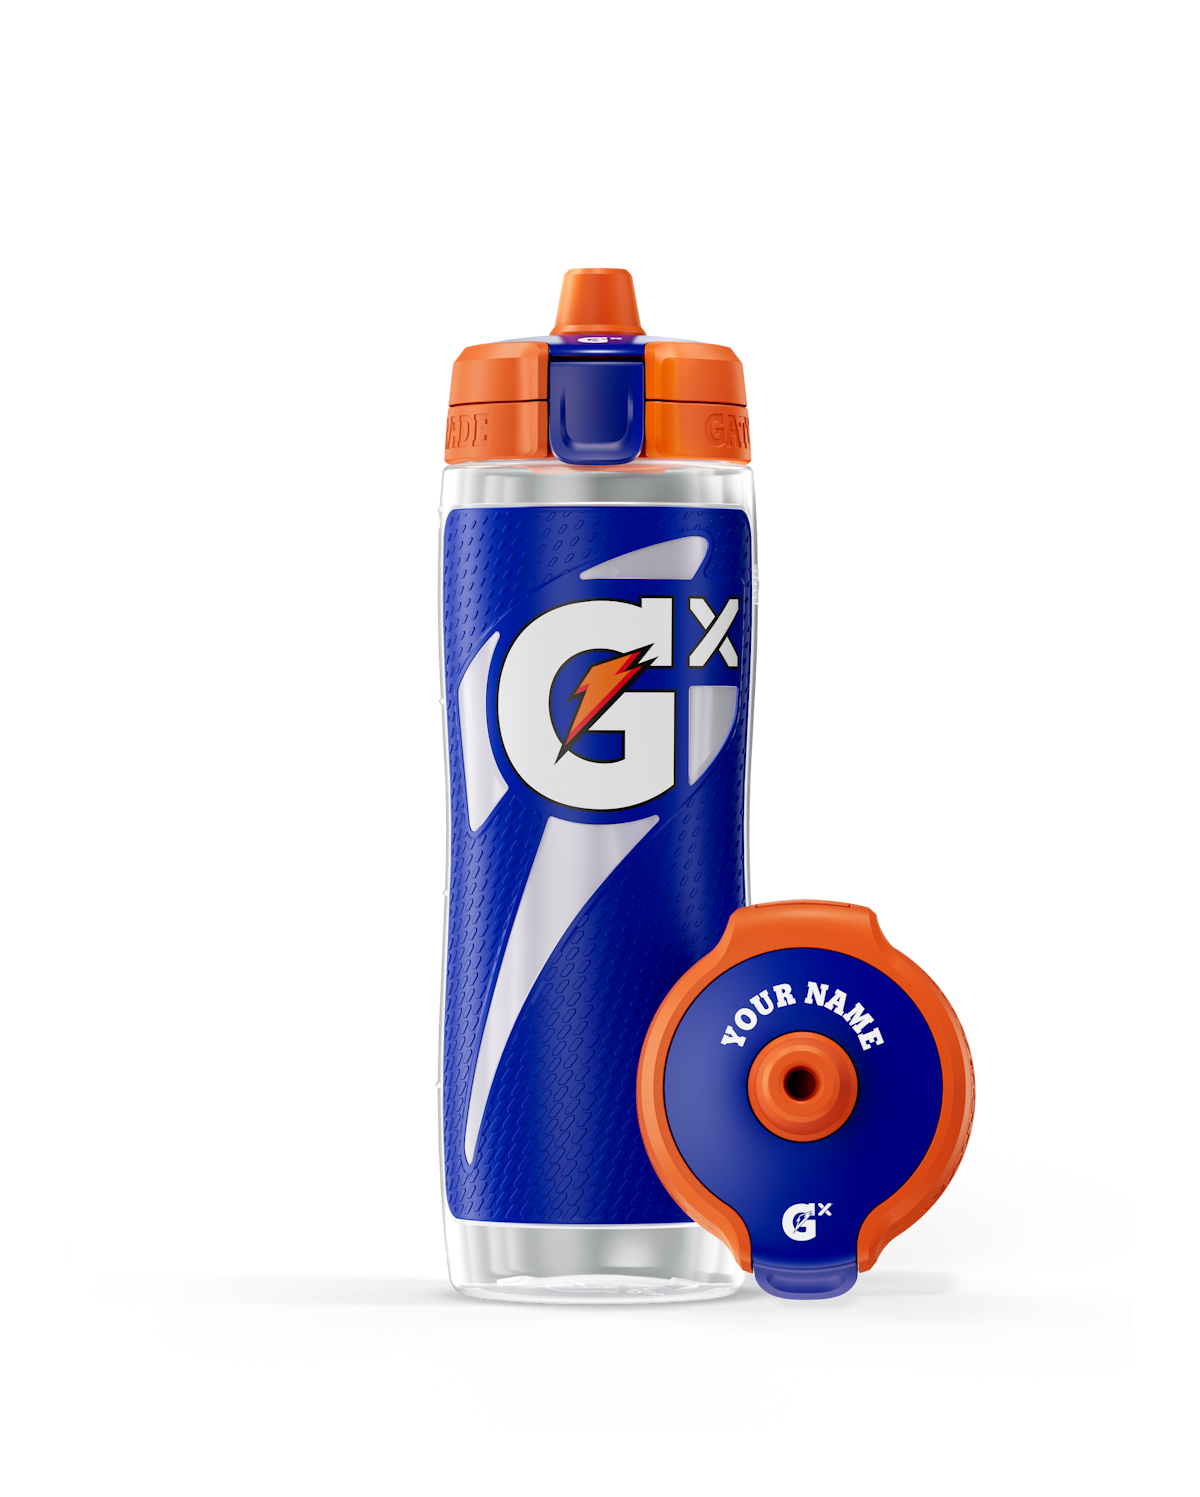 https://www.datocms-assets.com/101859/1691708686-00052000014761_gxsqueezebottle_royalblue_producttile_2680x3344.png?auto=format&fit=fill&w=1200&ar=16%3A9&fill=solid